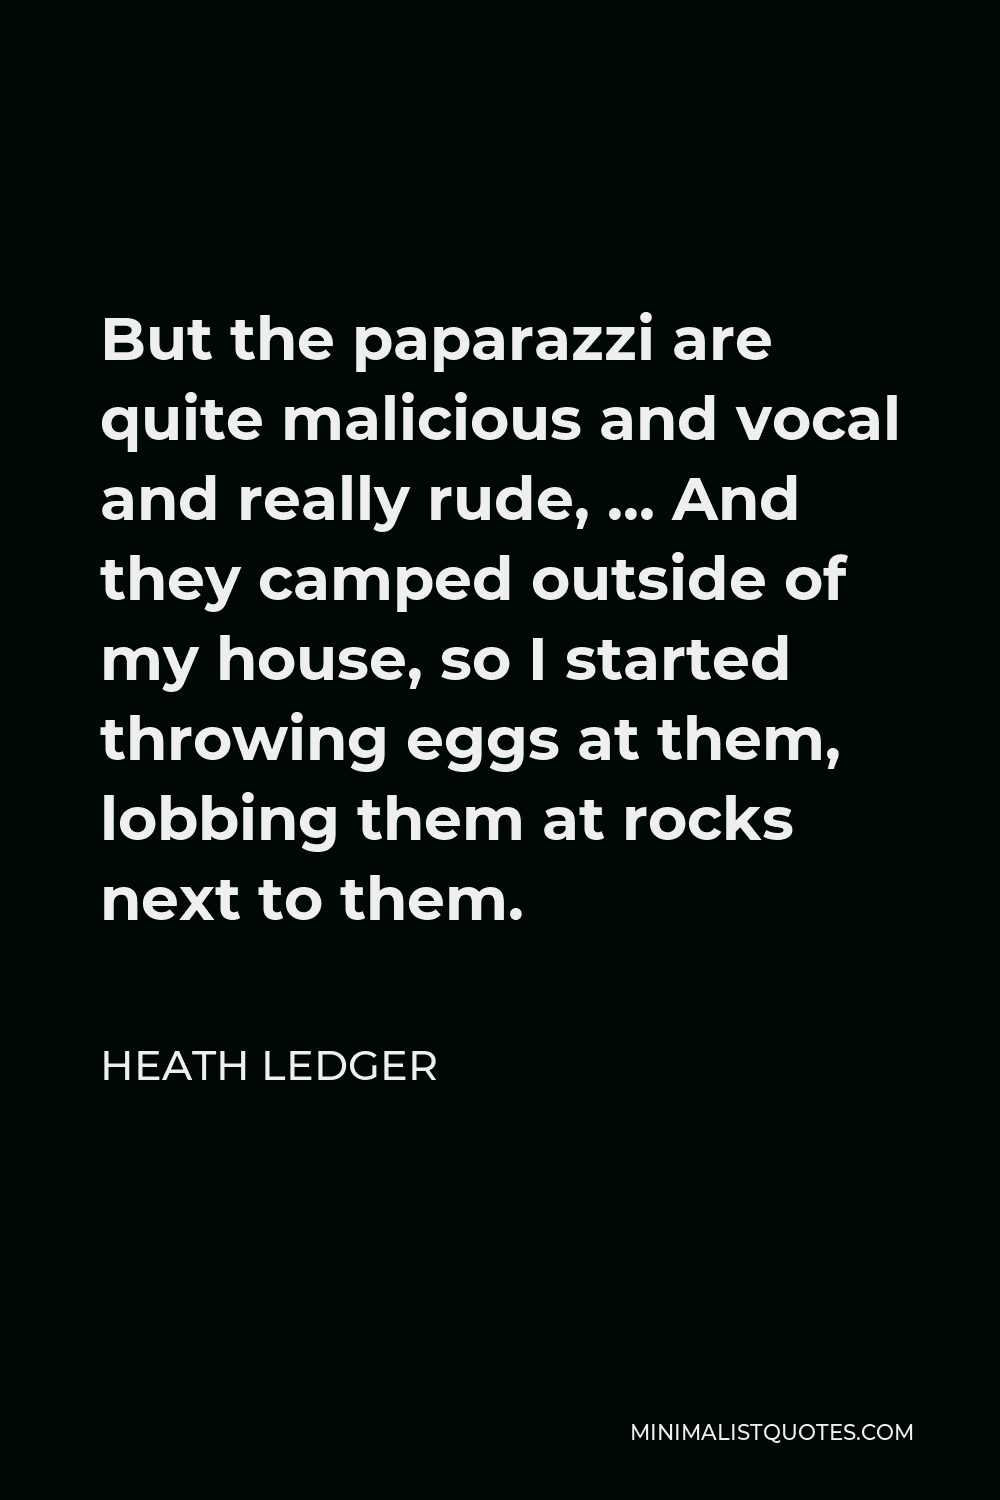 Heath Ledger Quote - But the paparazzi are quite malicious and vocal and really rude, … And they camped outside of my house, so I started throwing eggs at them, lobbing them at rocks next to them.